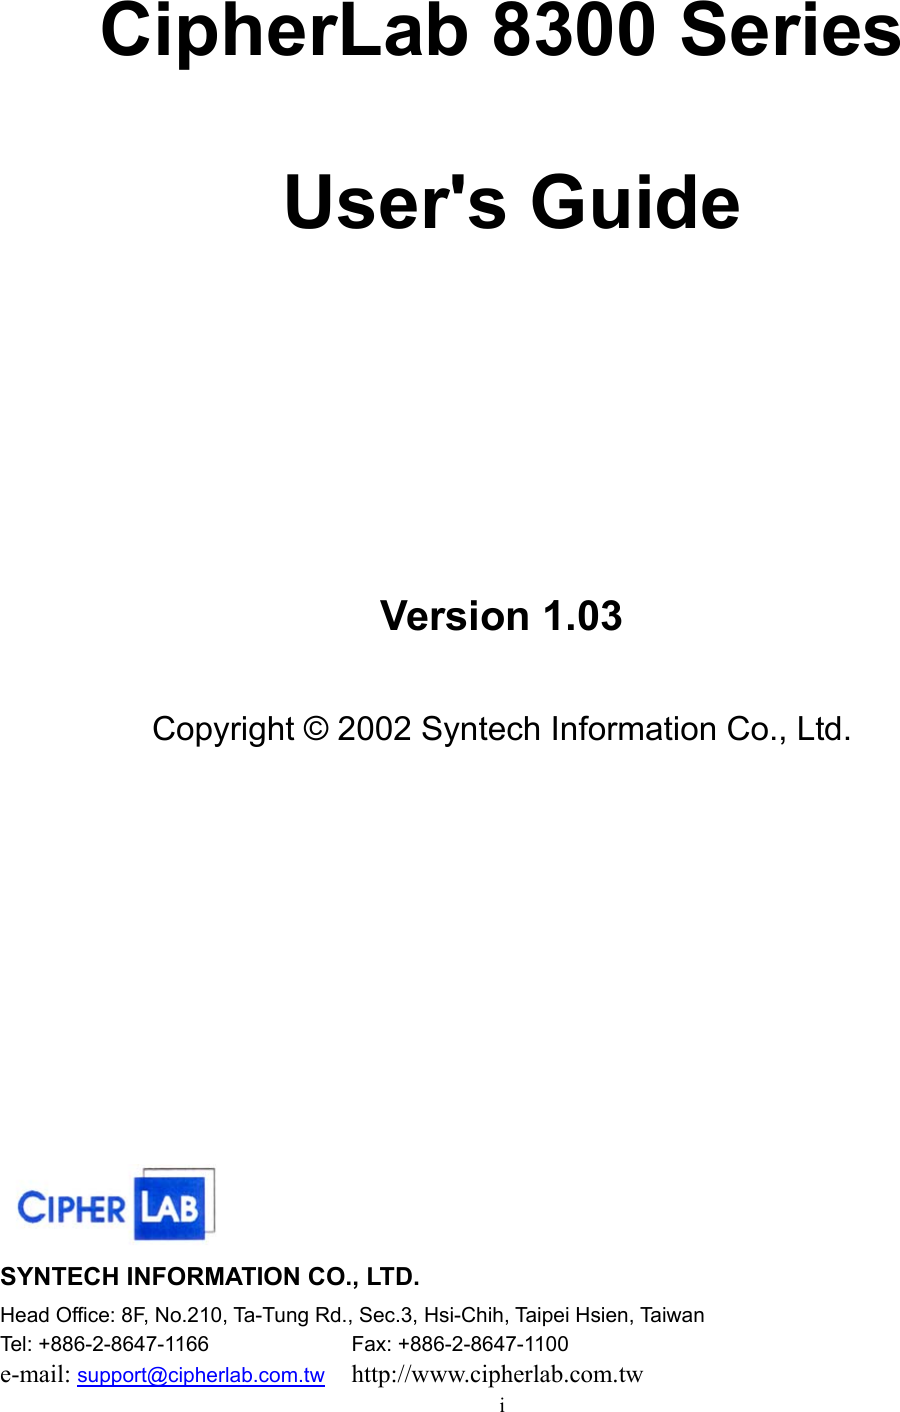  i CipherLab 8300 Series   User&apos;s Guide      Version 1.03  Copyright © 2002 Syntech Information Co., Ltd.       SYNTECH INFORMATION CO., LTD. Head Office: 8F, No.210, Ta-Tung Rd., Sec.3, Hsi-Chih, Taipei Hsien, Taiwan Tel: +886-2-8647-1166   Fax: +886-2-8647-1100 e-mail: support@cipherlab.com.tw http://www.cipherlab.com.tw 